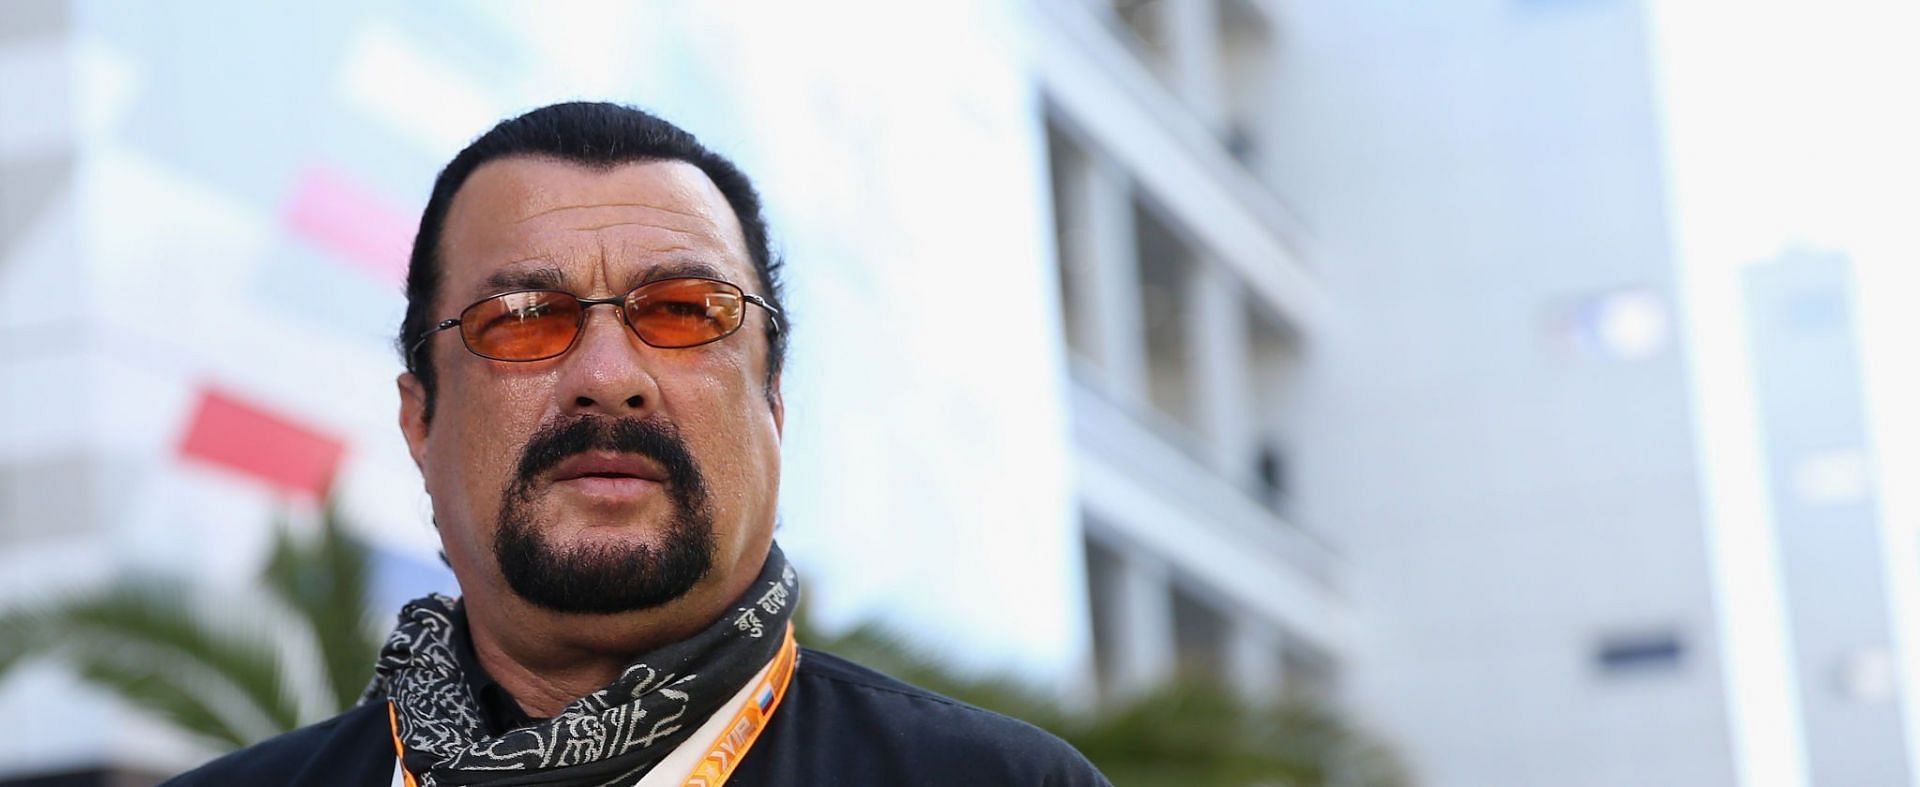 Steven Seagal reportedly has citizenships in the US, Serbia and Russia (Image via Getty Images)